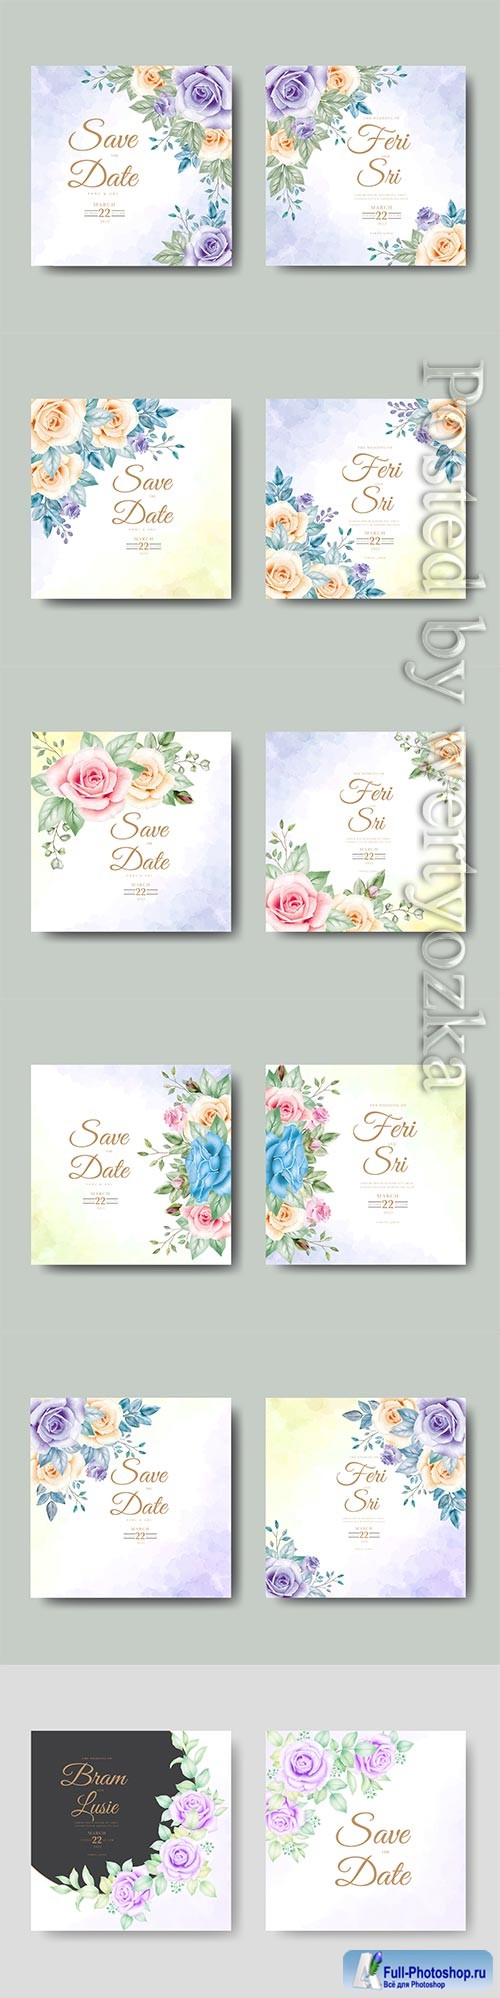 Beautiful vector wedding invitation card with floral watercolor